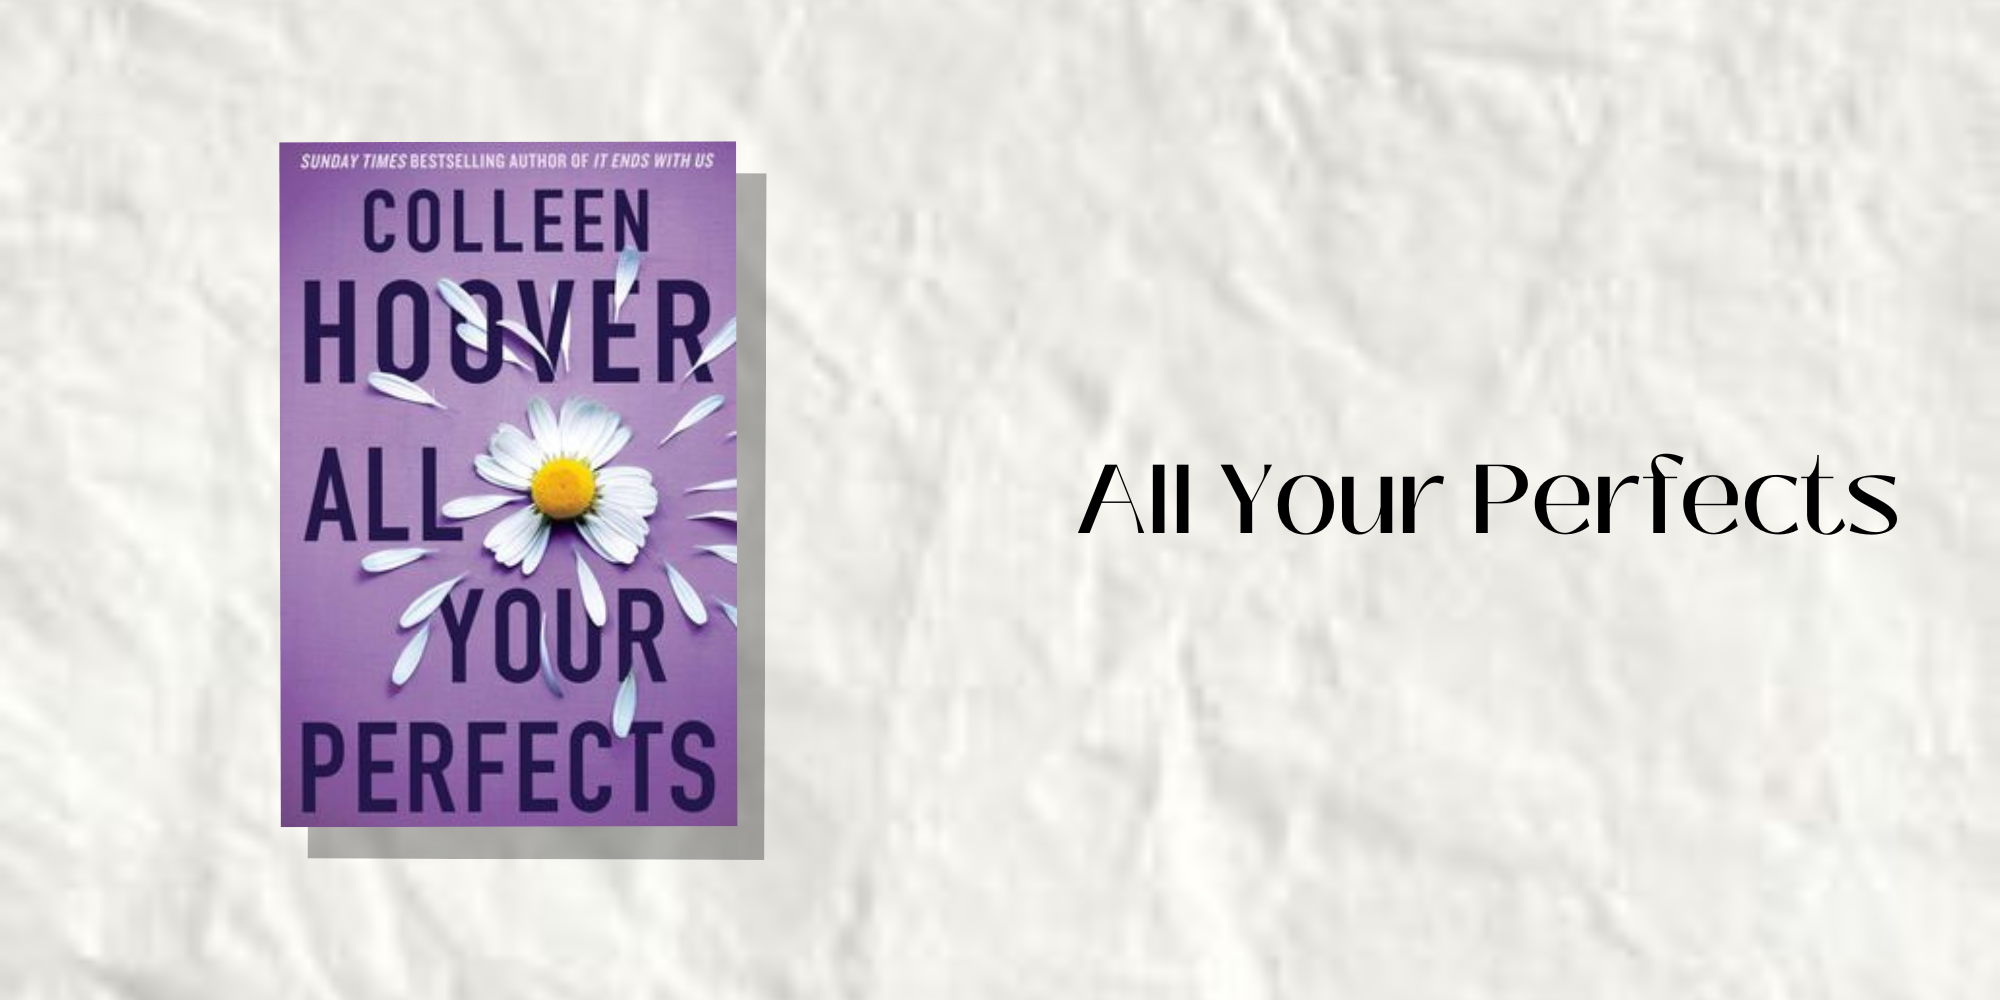 The paperback of All Your Perfects